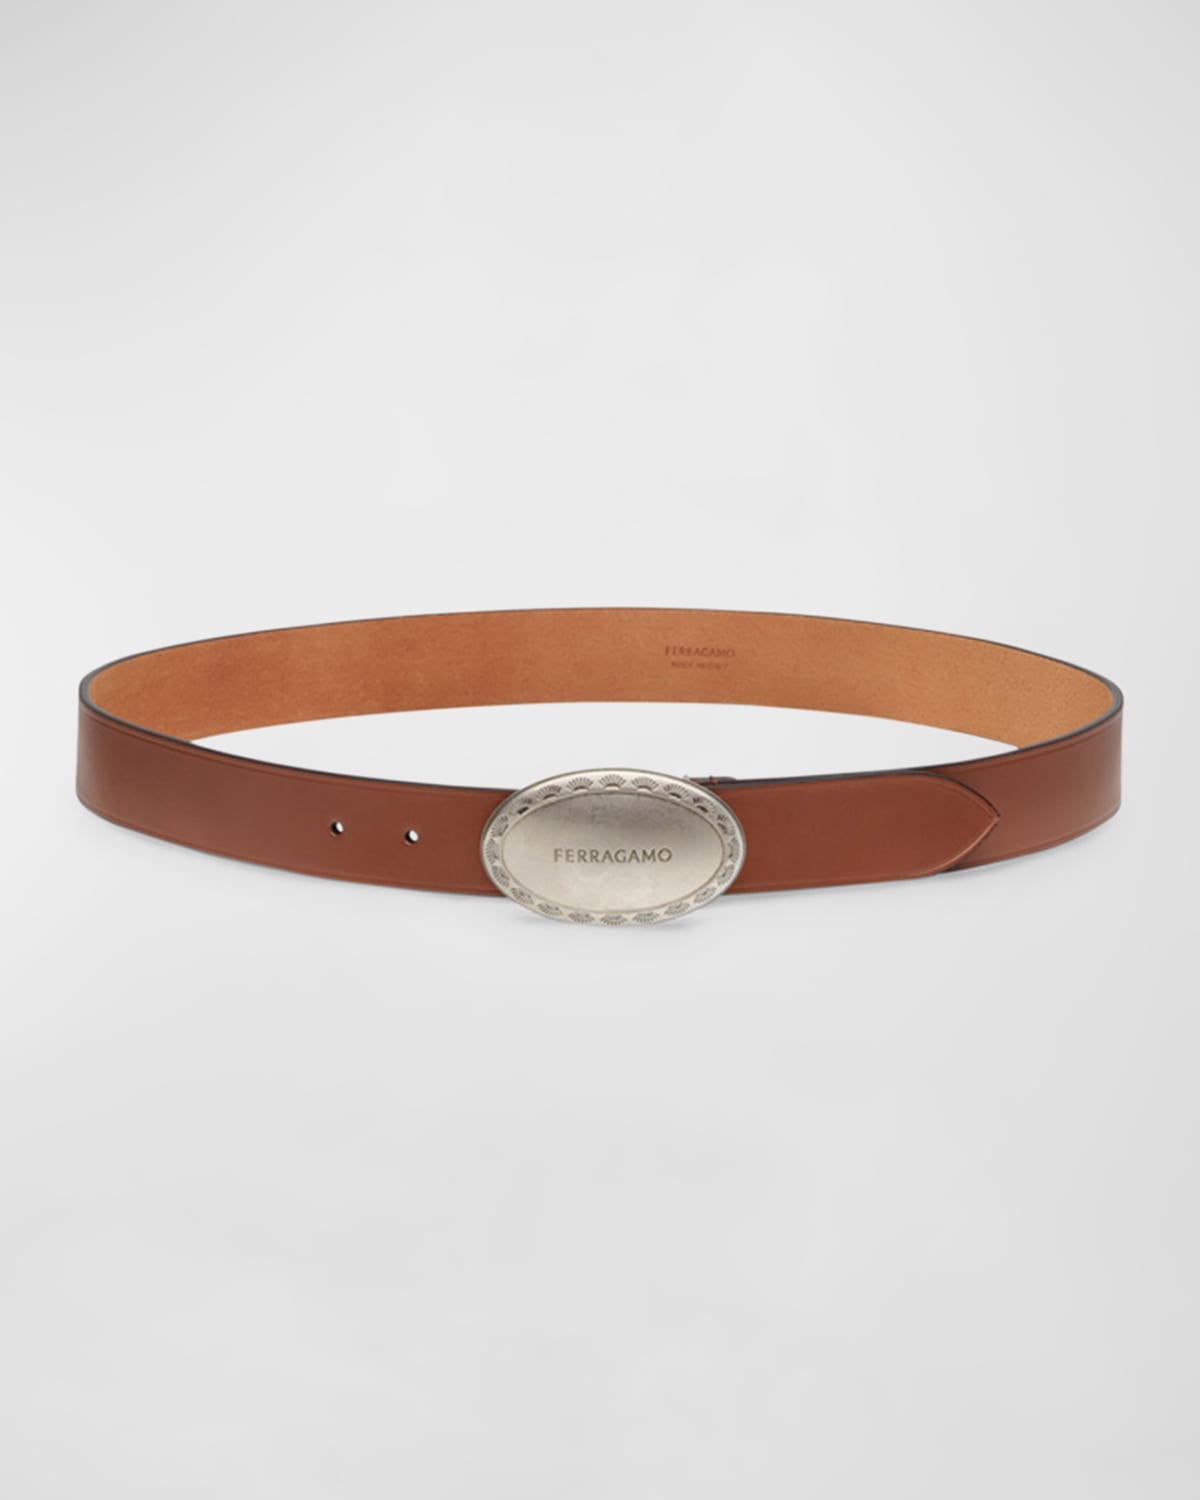 Ferragamo Men's Oval Buckle Leather Belt In New Vicuna